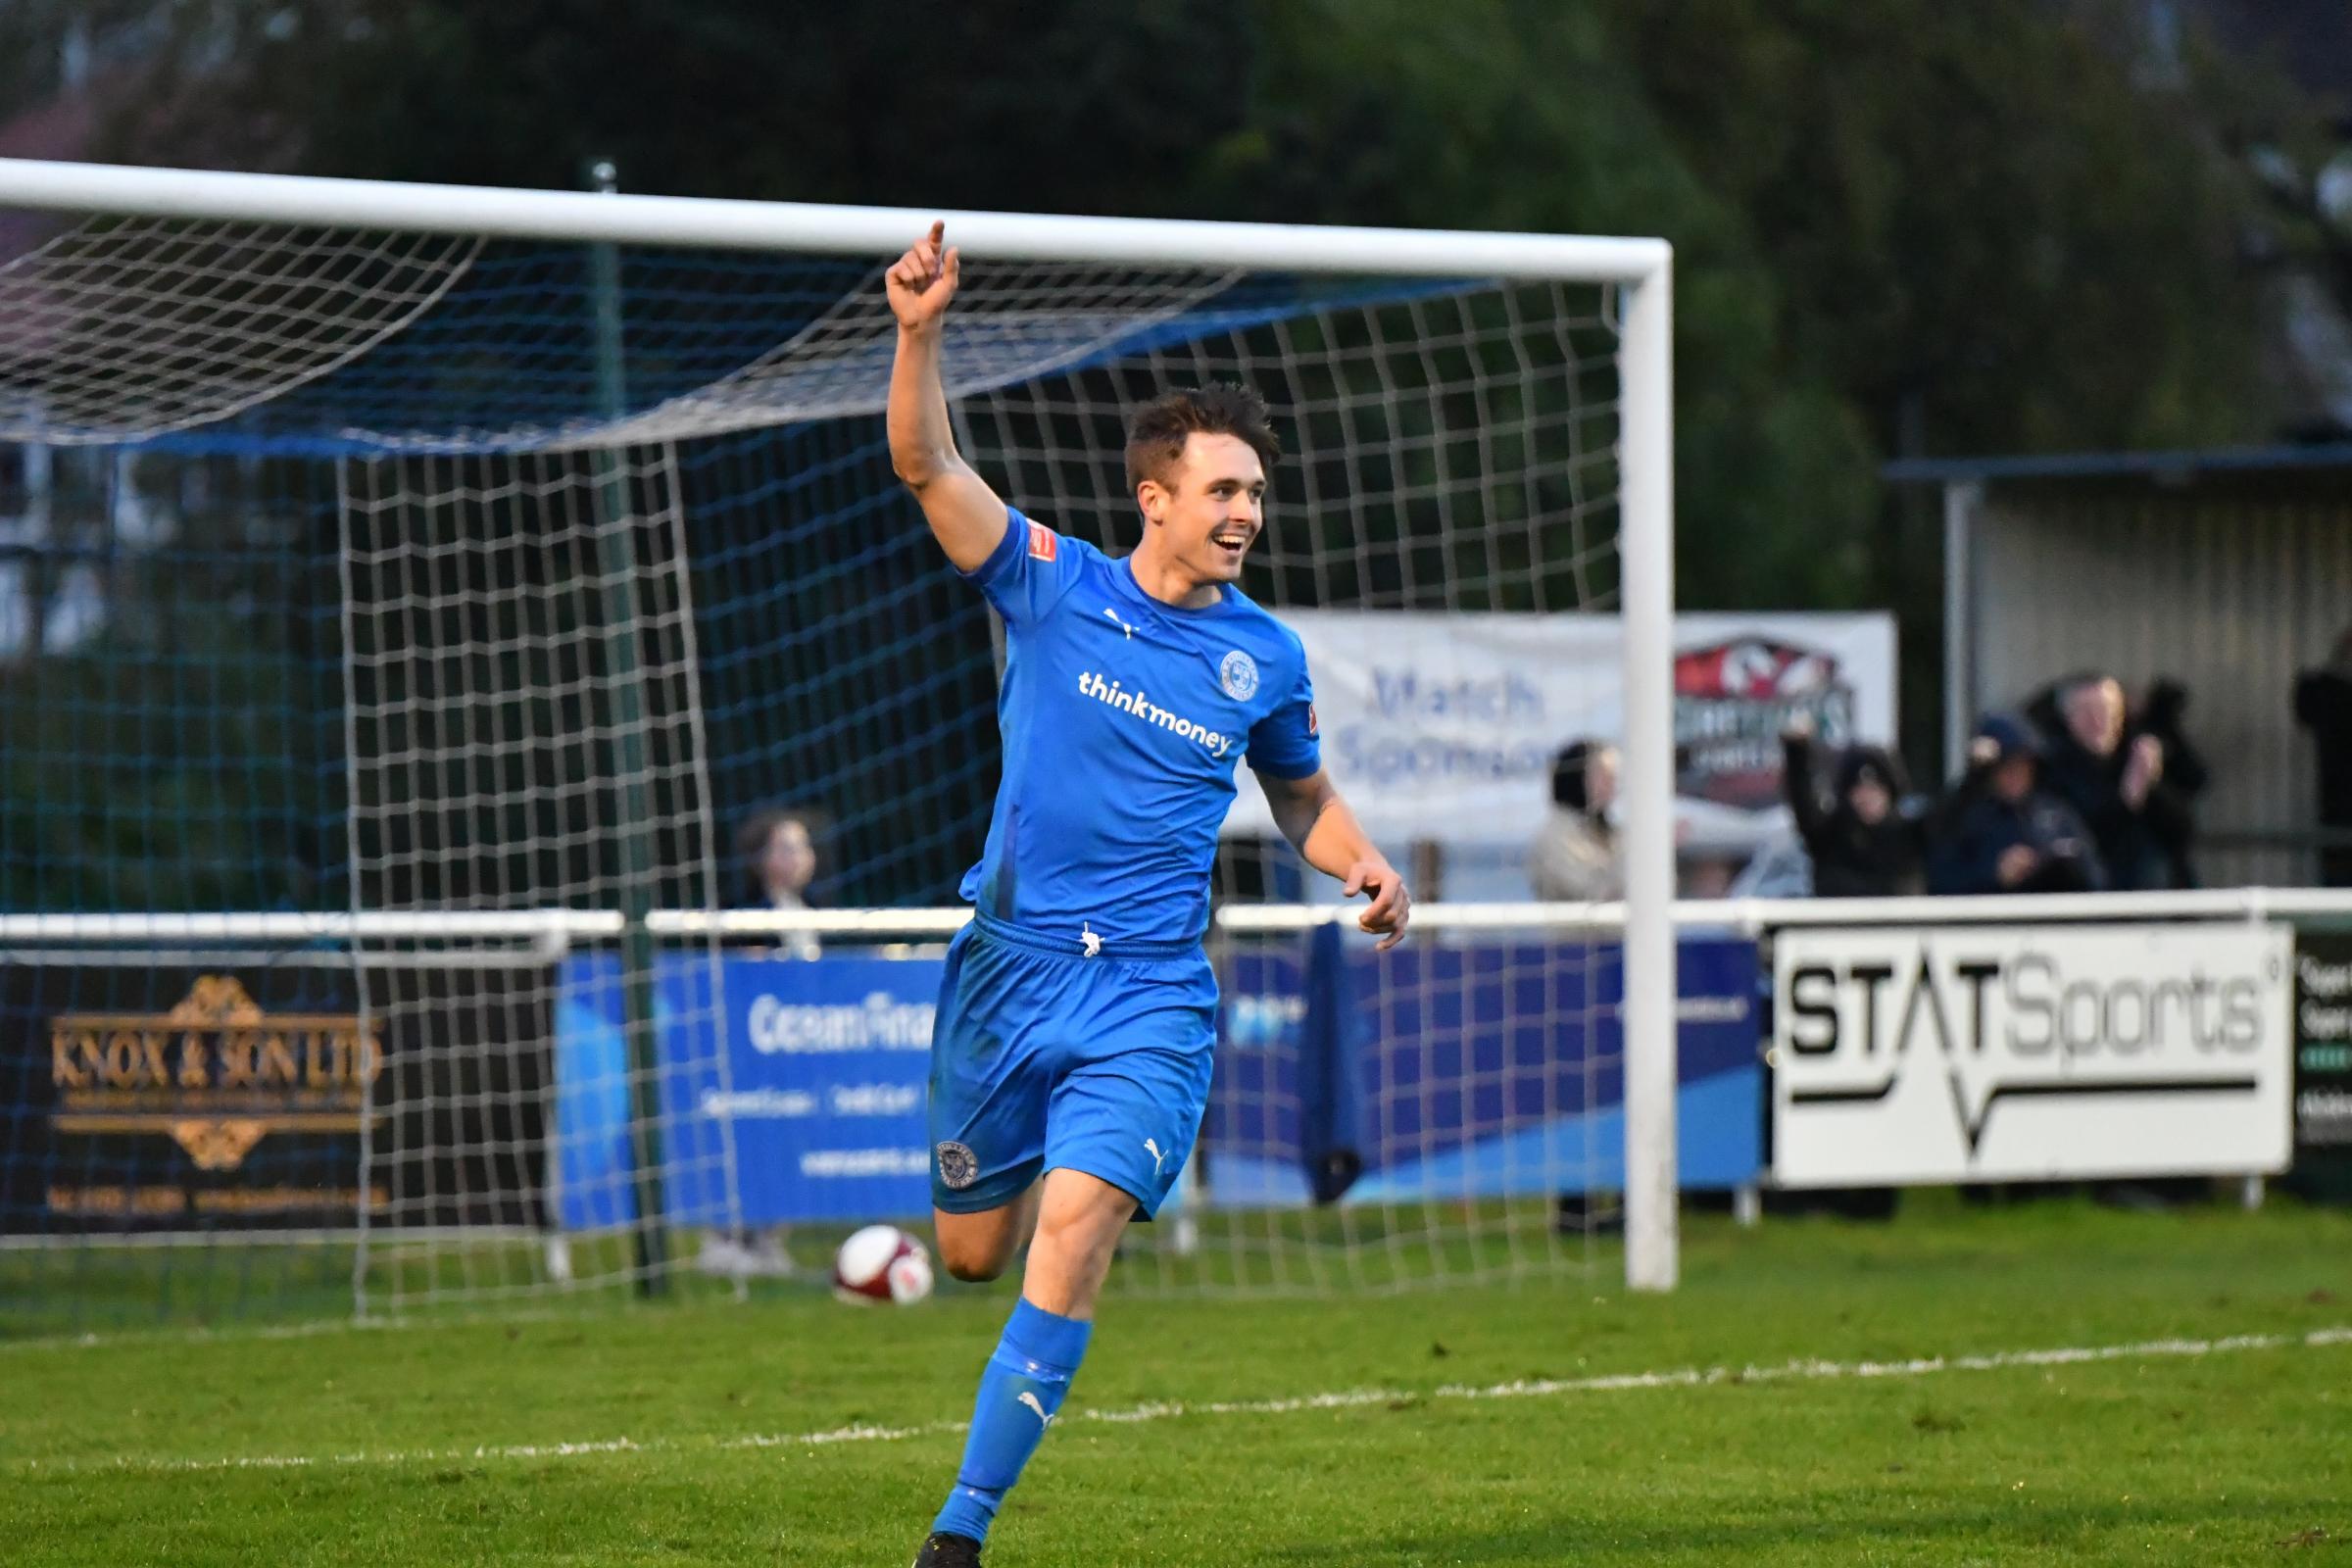 Andy Scarisbrick became the 17th different player to score for Warrington Rylands this season when he netted against Clitheroe on Saturday. Picture by Mark Percy